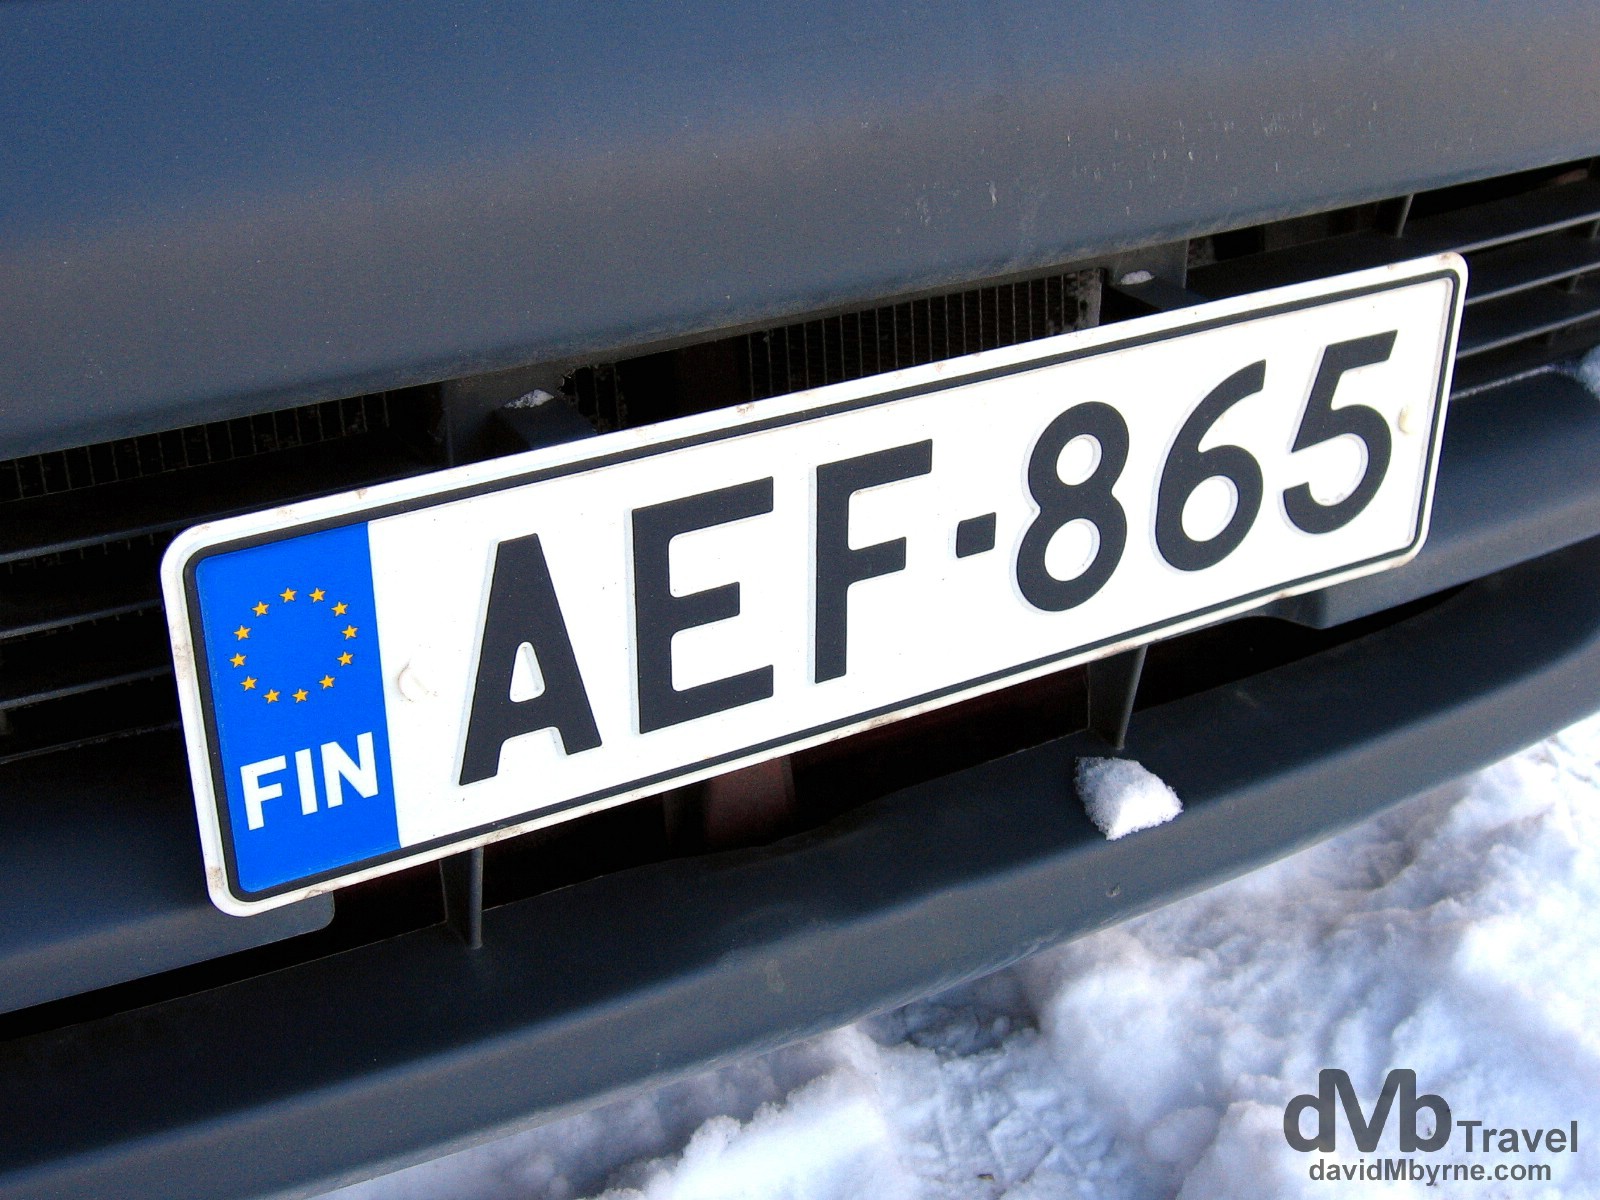 A car license plate on the snowy streets of Helsinki, Finland. March 1, 2006.